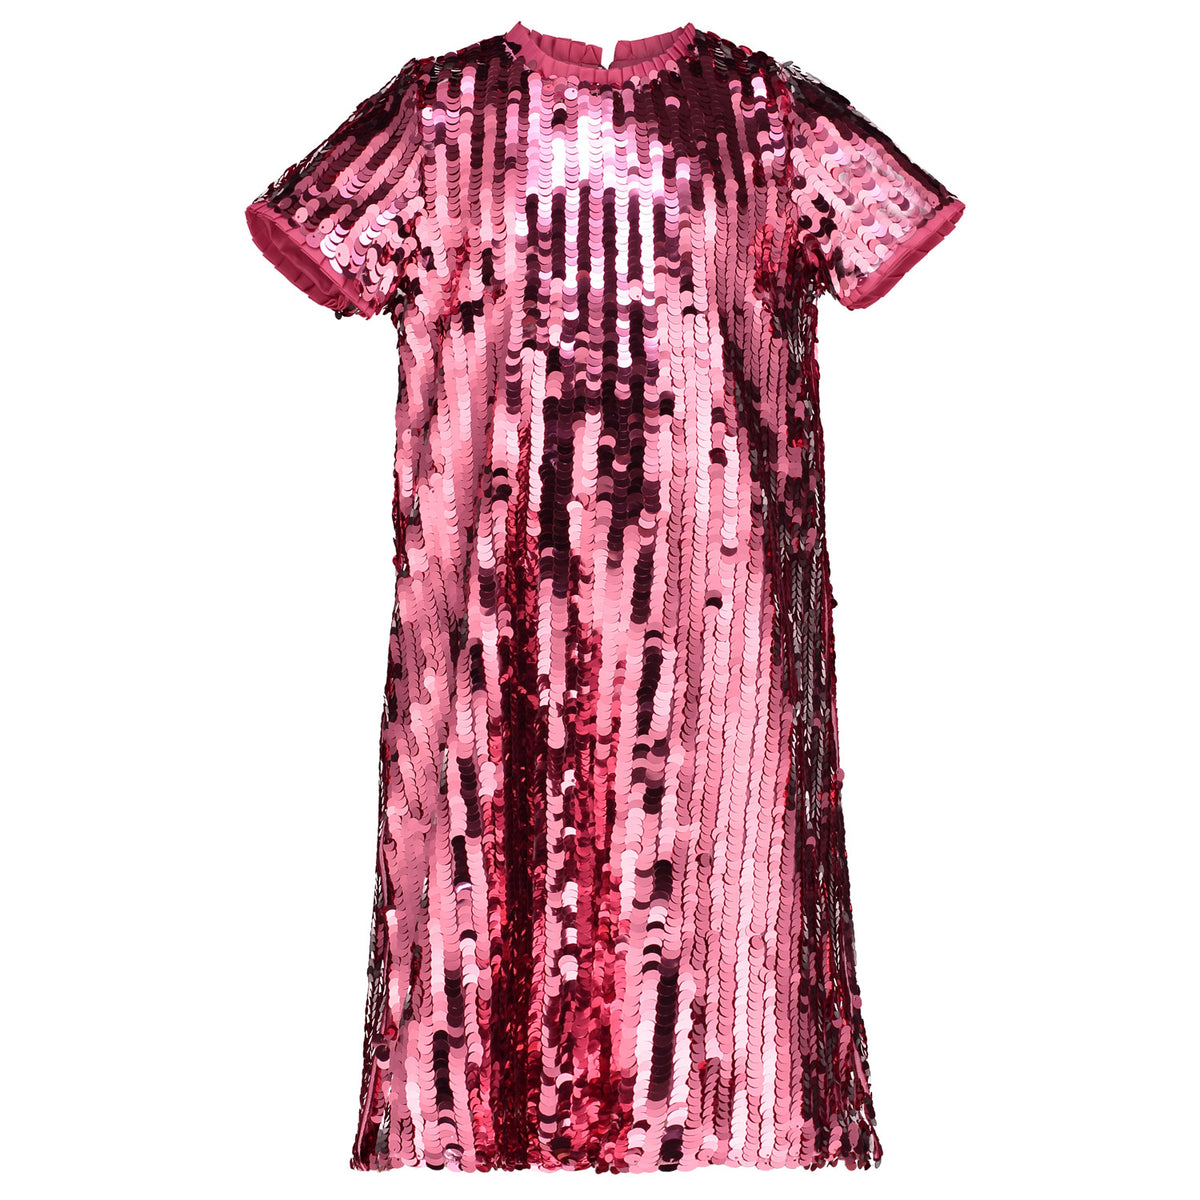 Coco Sequin Girls Party Dress Candy Pink | Holly Hastie London